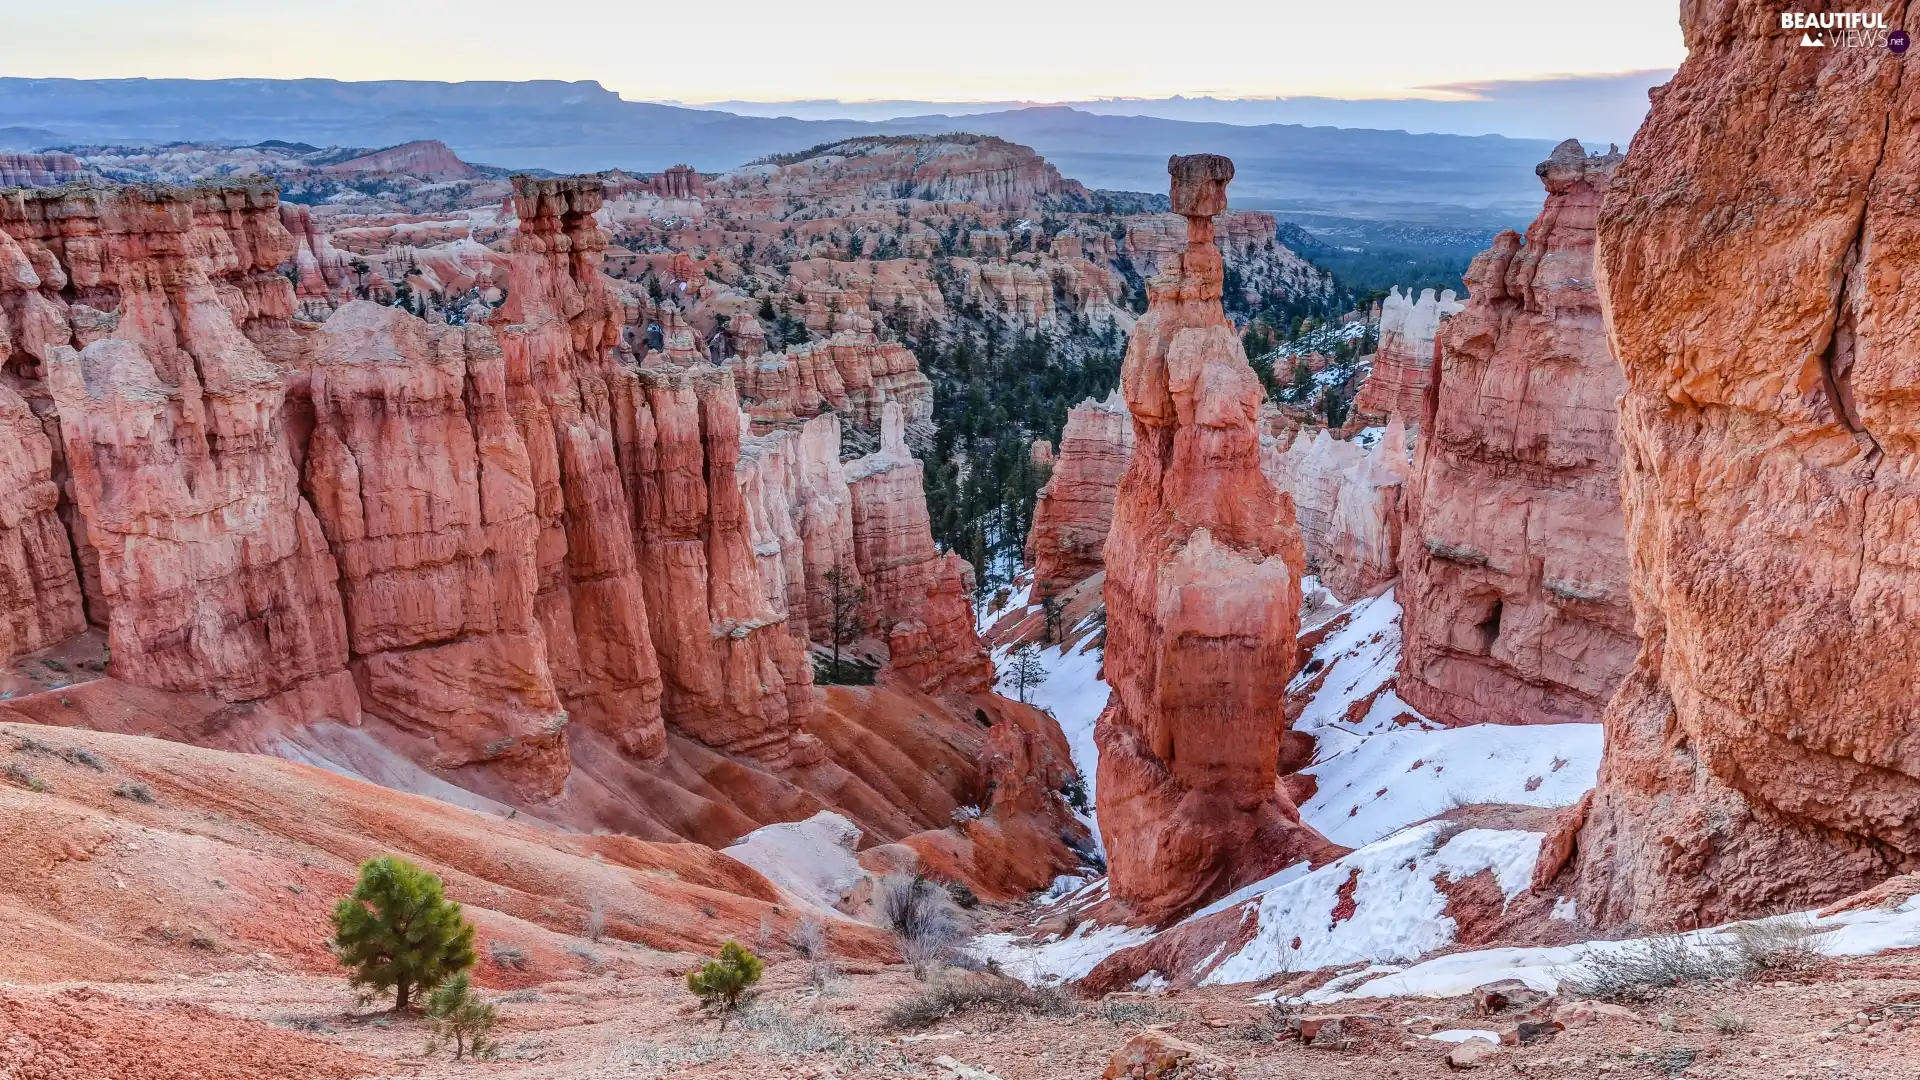 viewes, rocks, Utah, trees, Mountains, Bryce Canyon National Park, The United States